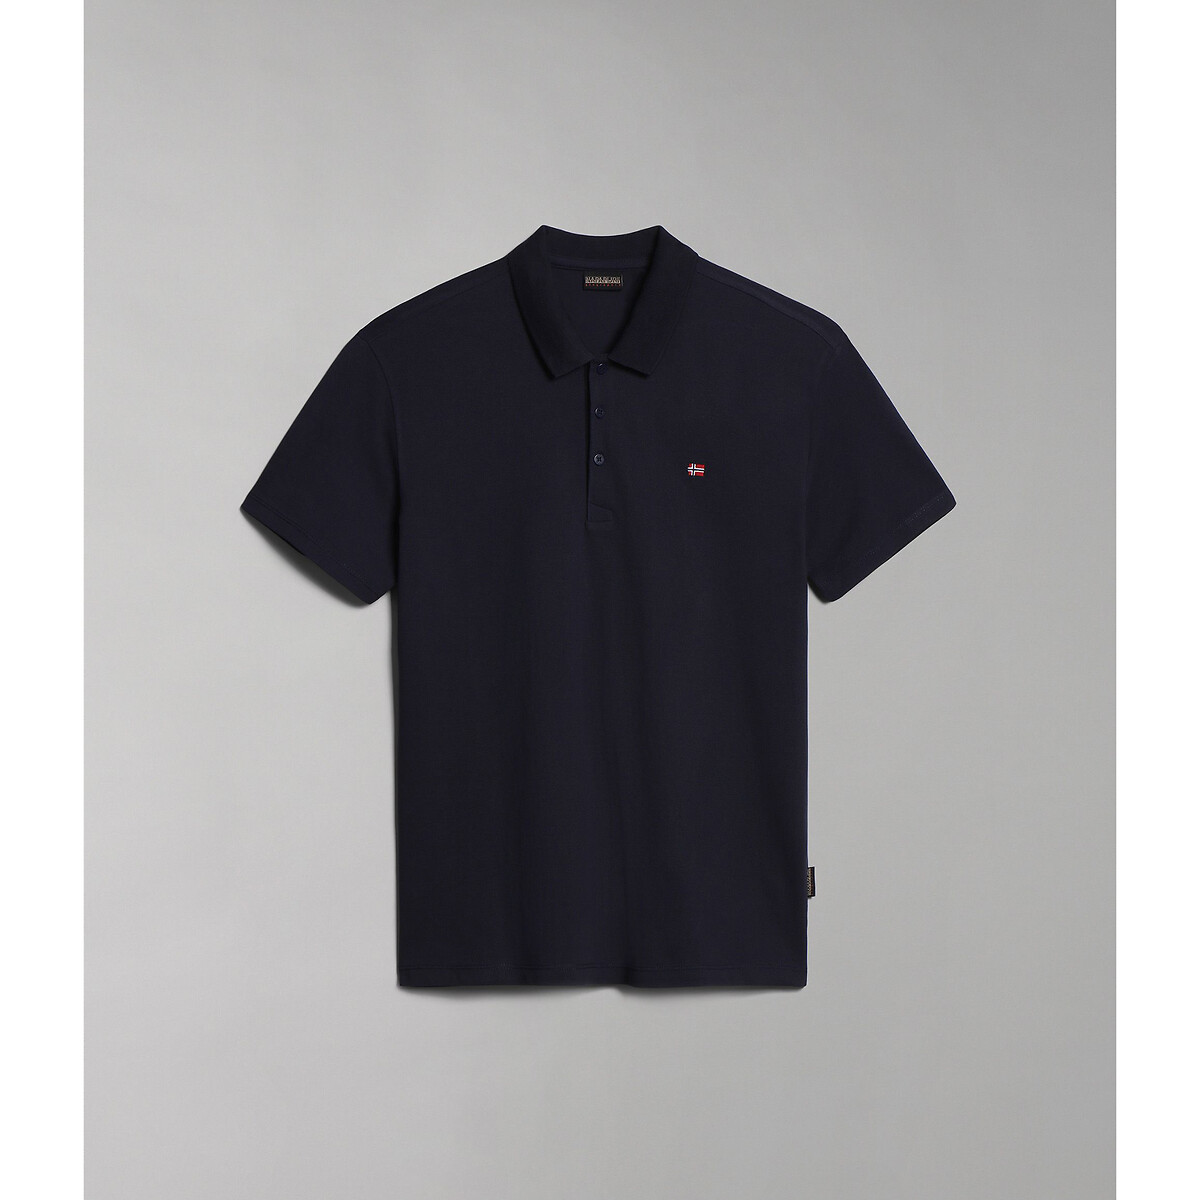 Image of Ealis Cotton Polo Shirt with Short Sleeves